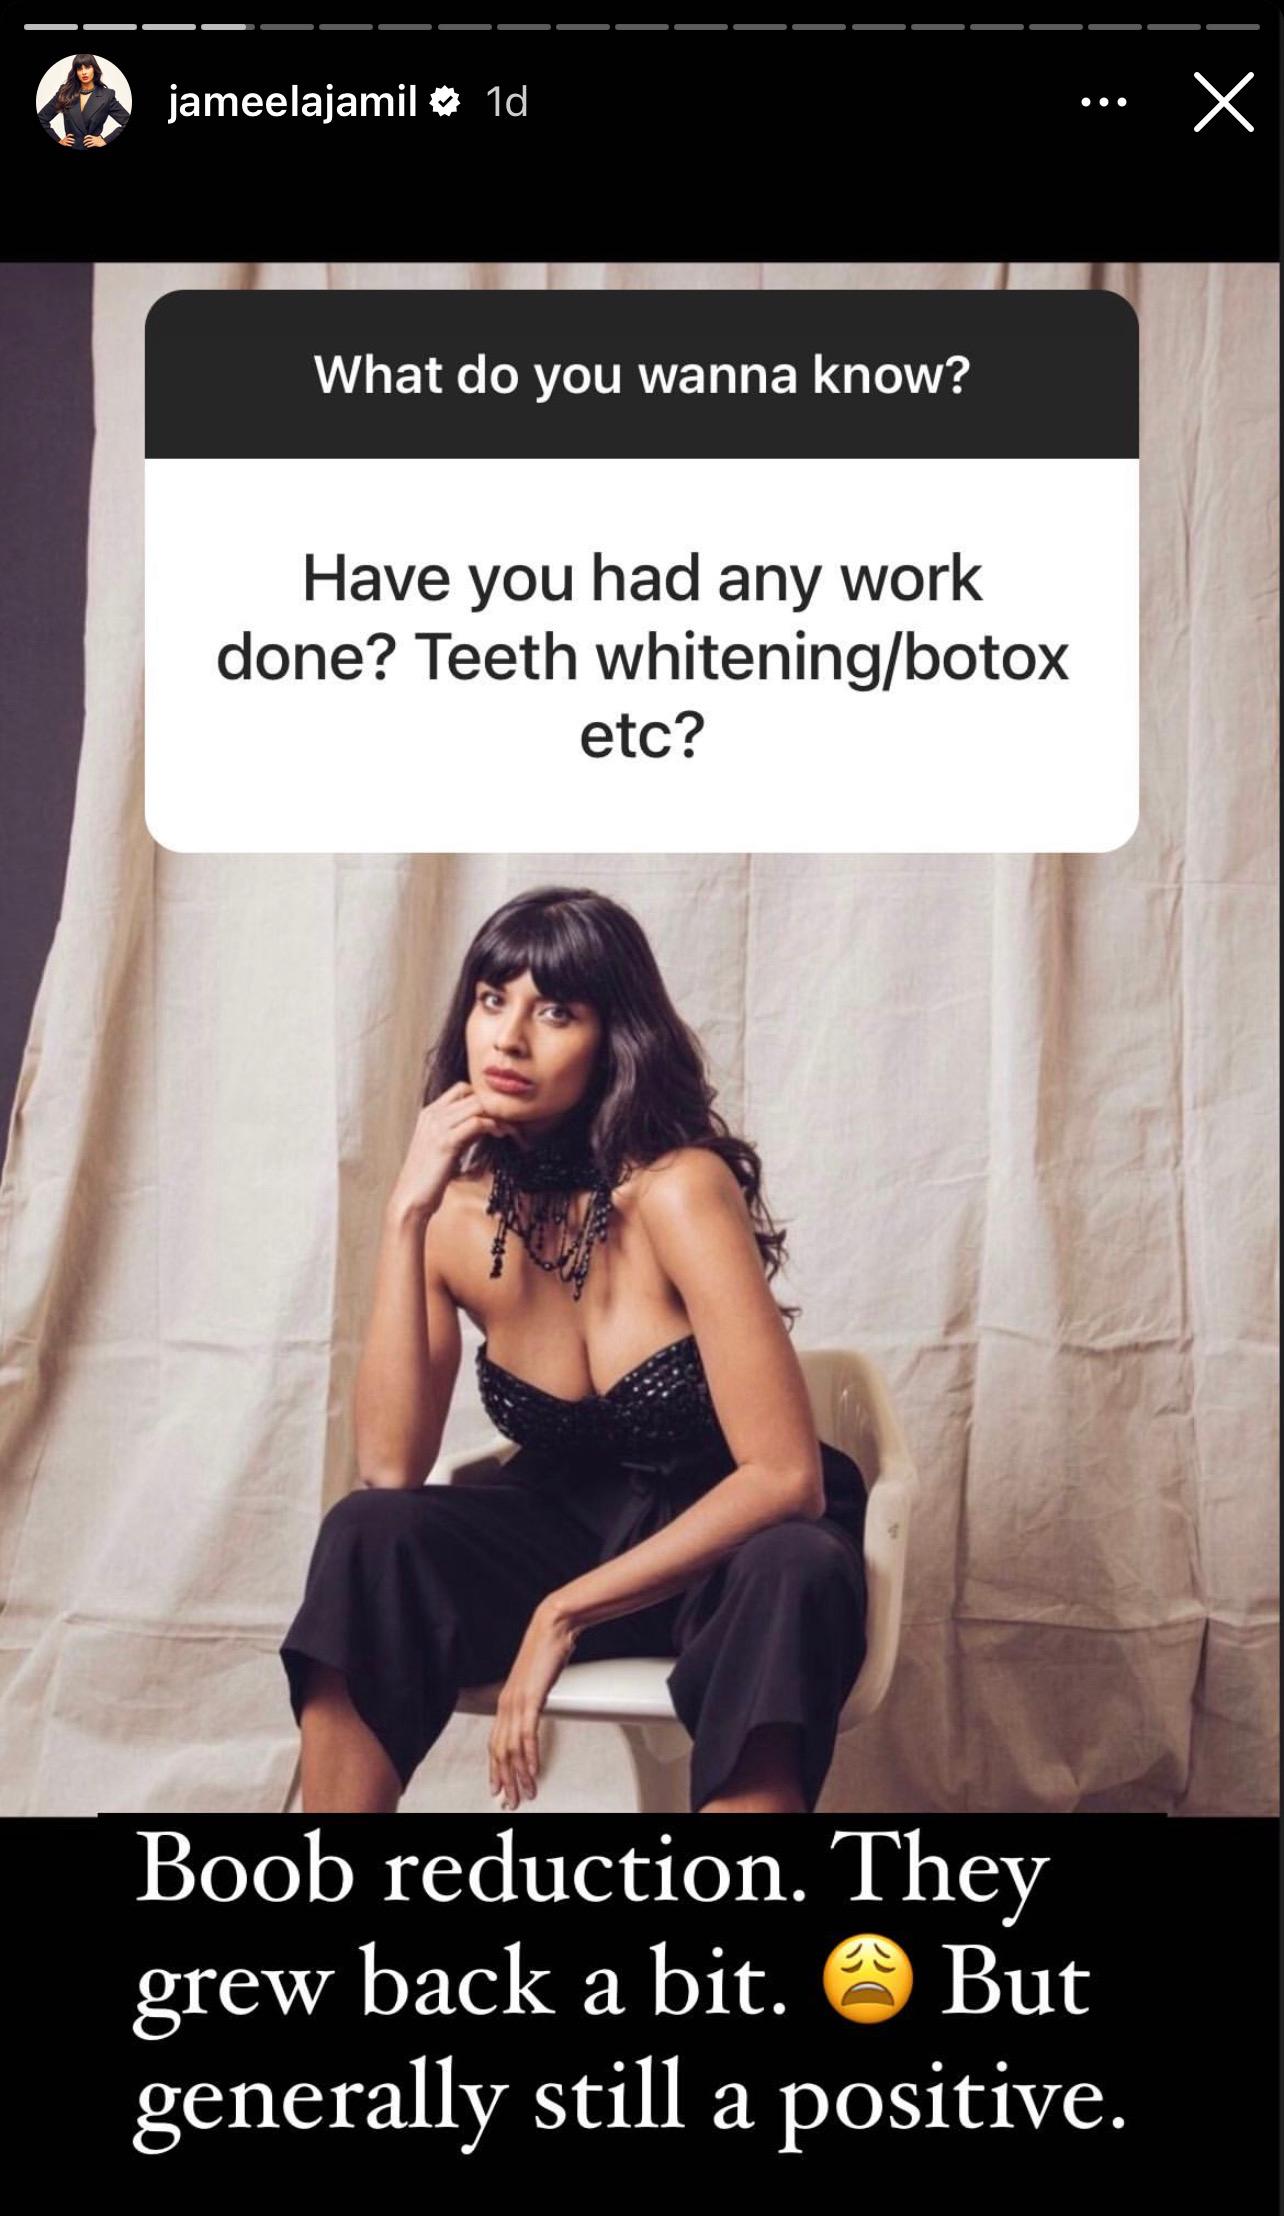 Jameela Jamil Reveals The Only Enhancement Surgery She Has Done